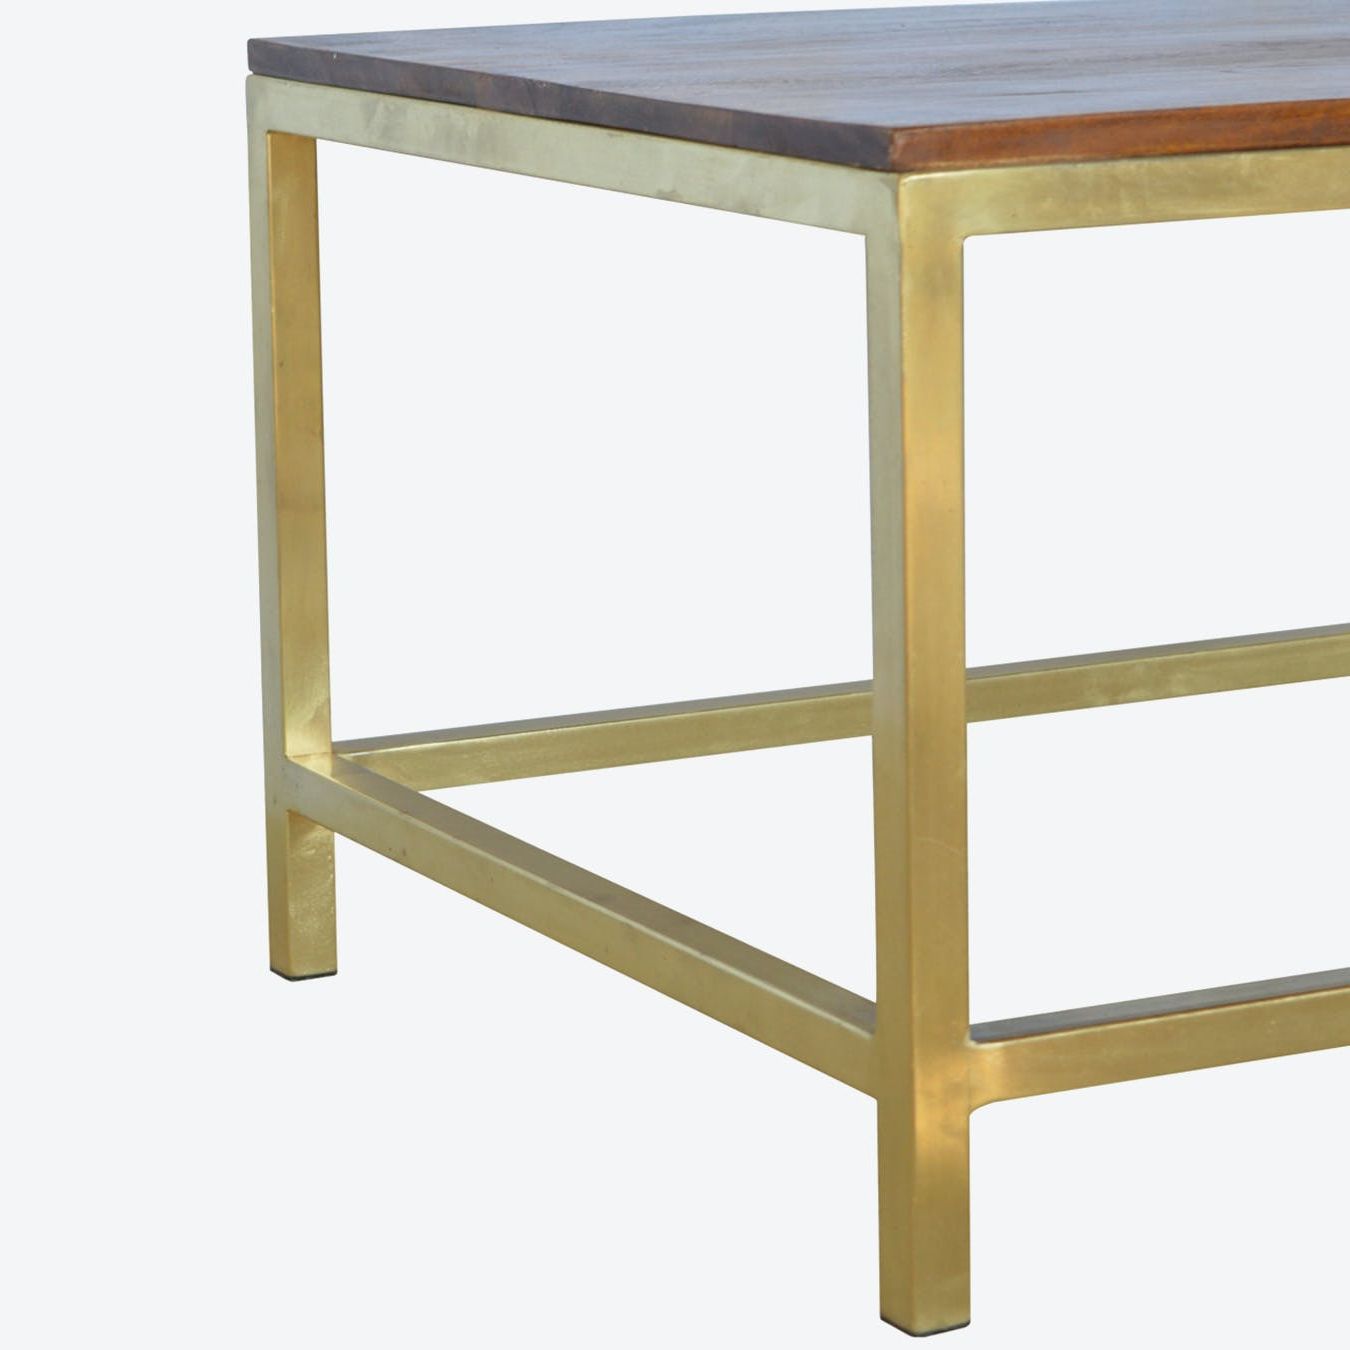 Rectangular Coffee Table With Gold Baseartisan Furniture – Fy Inside Rectangular Coffee Tables With Pedestal Bases (View 13 of 20)